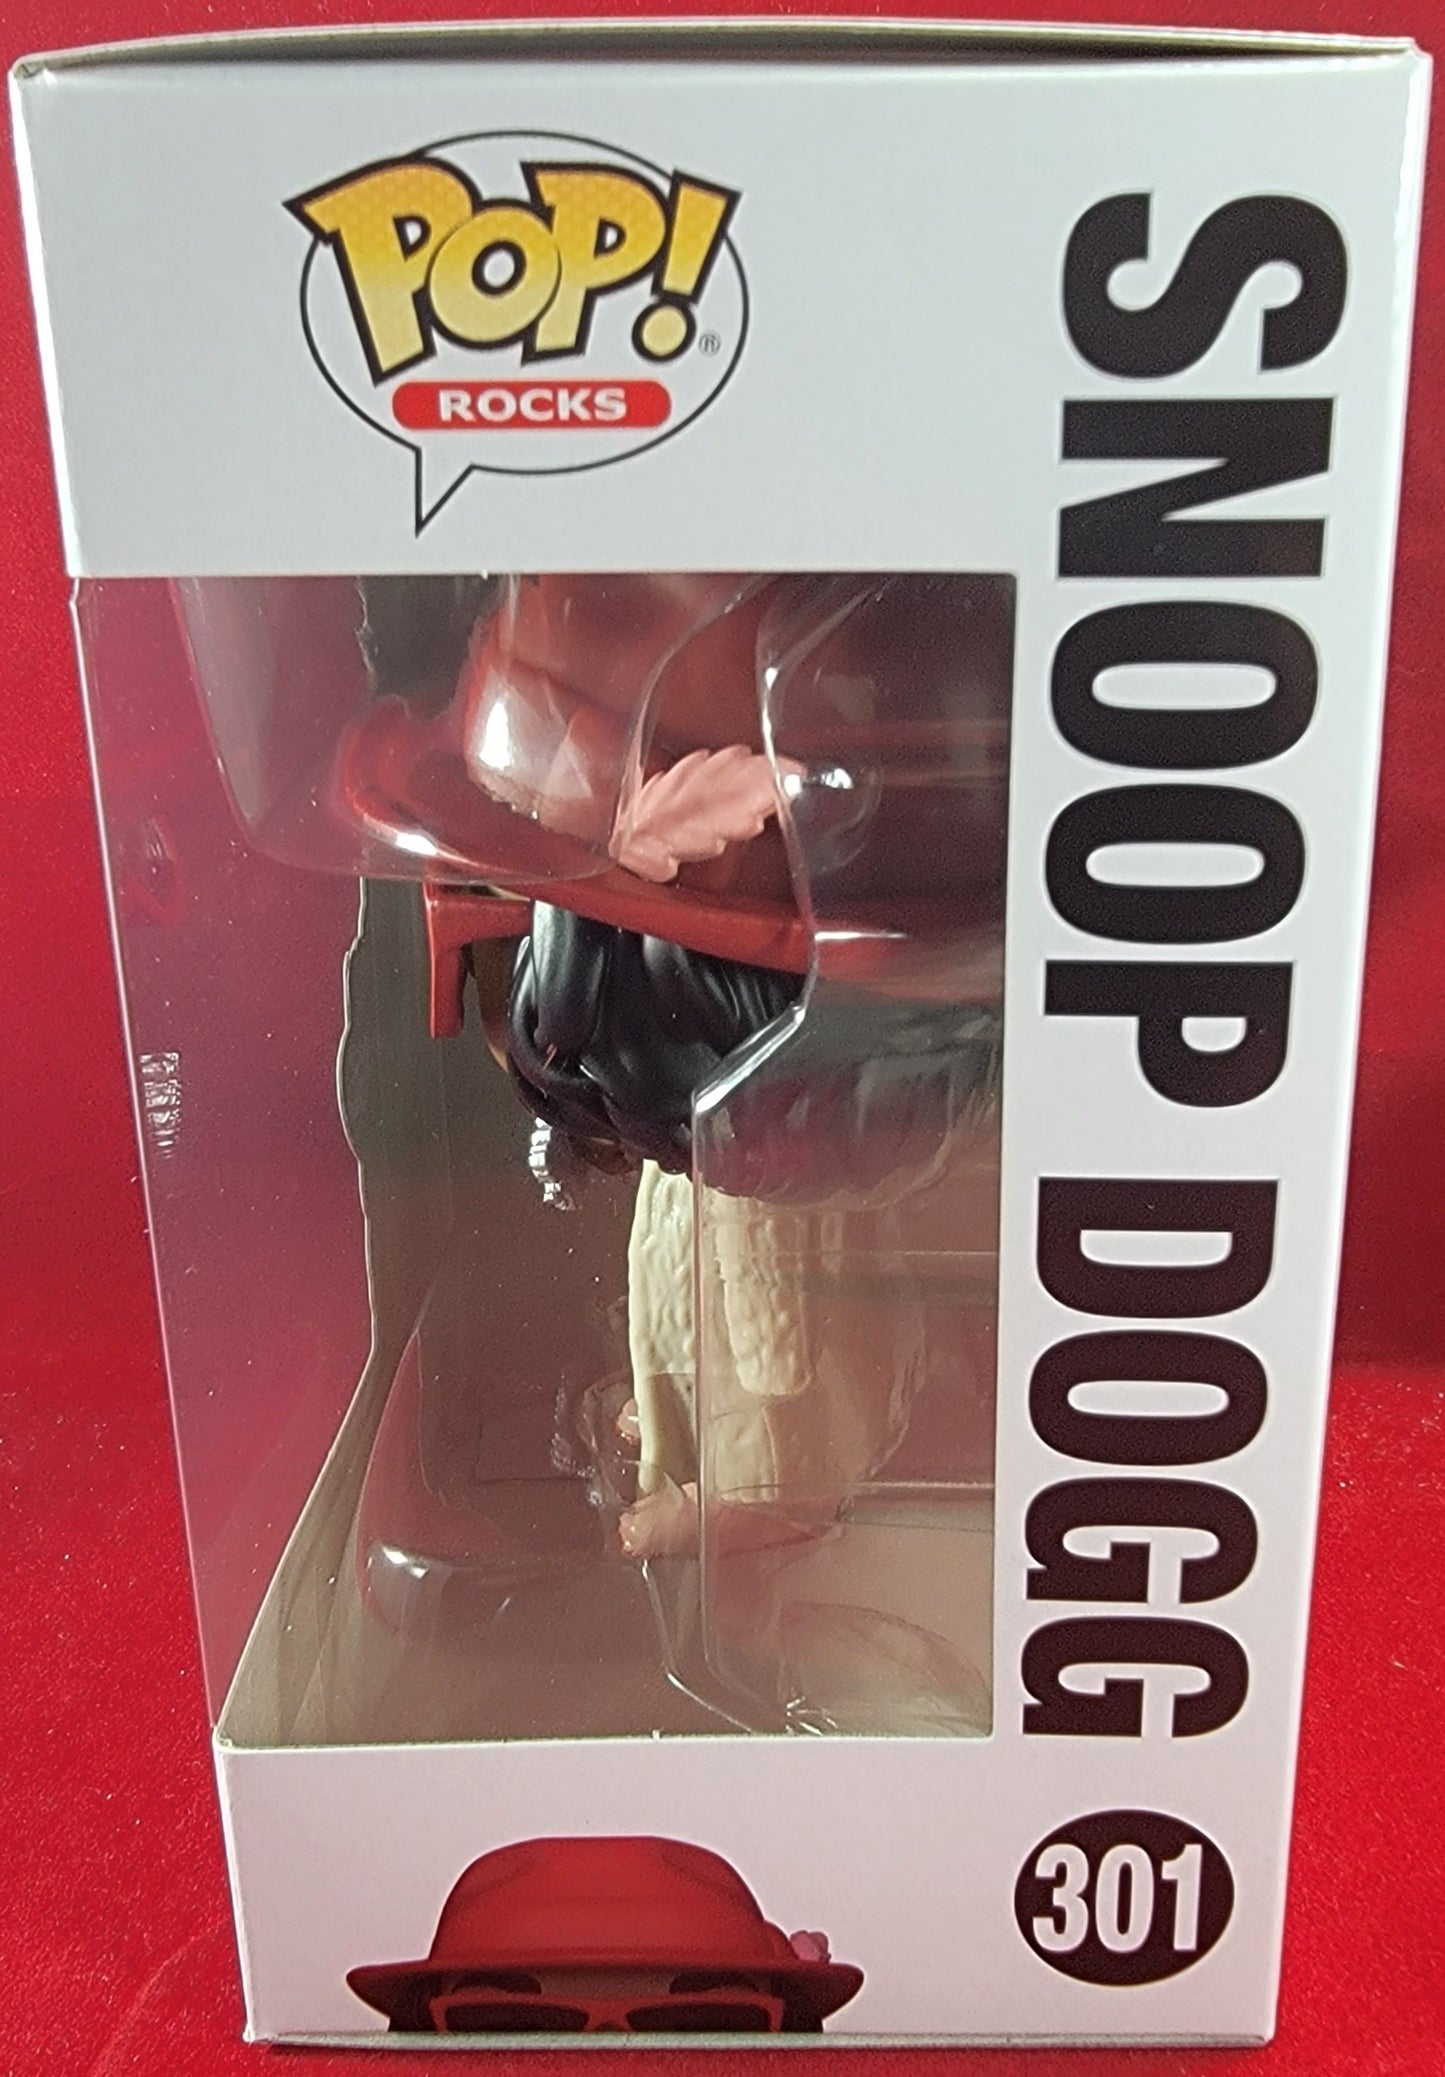 Snoop dog funko # 301 (nib)
brand new snoop funko. pop has snoop in red and khaki with snoop Dogg mike in hand. pop has a few lite scratches on the plastic and will be shipped in a compatible pop protector.